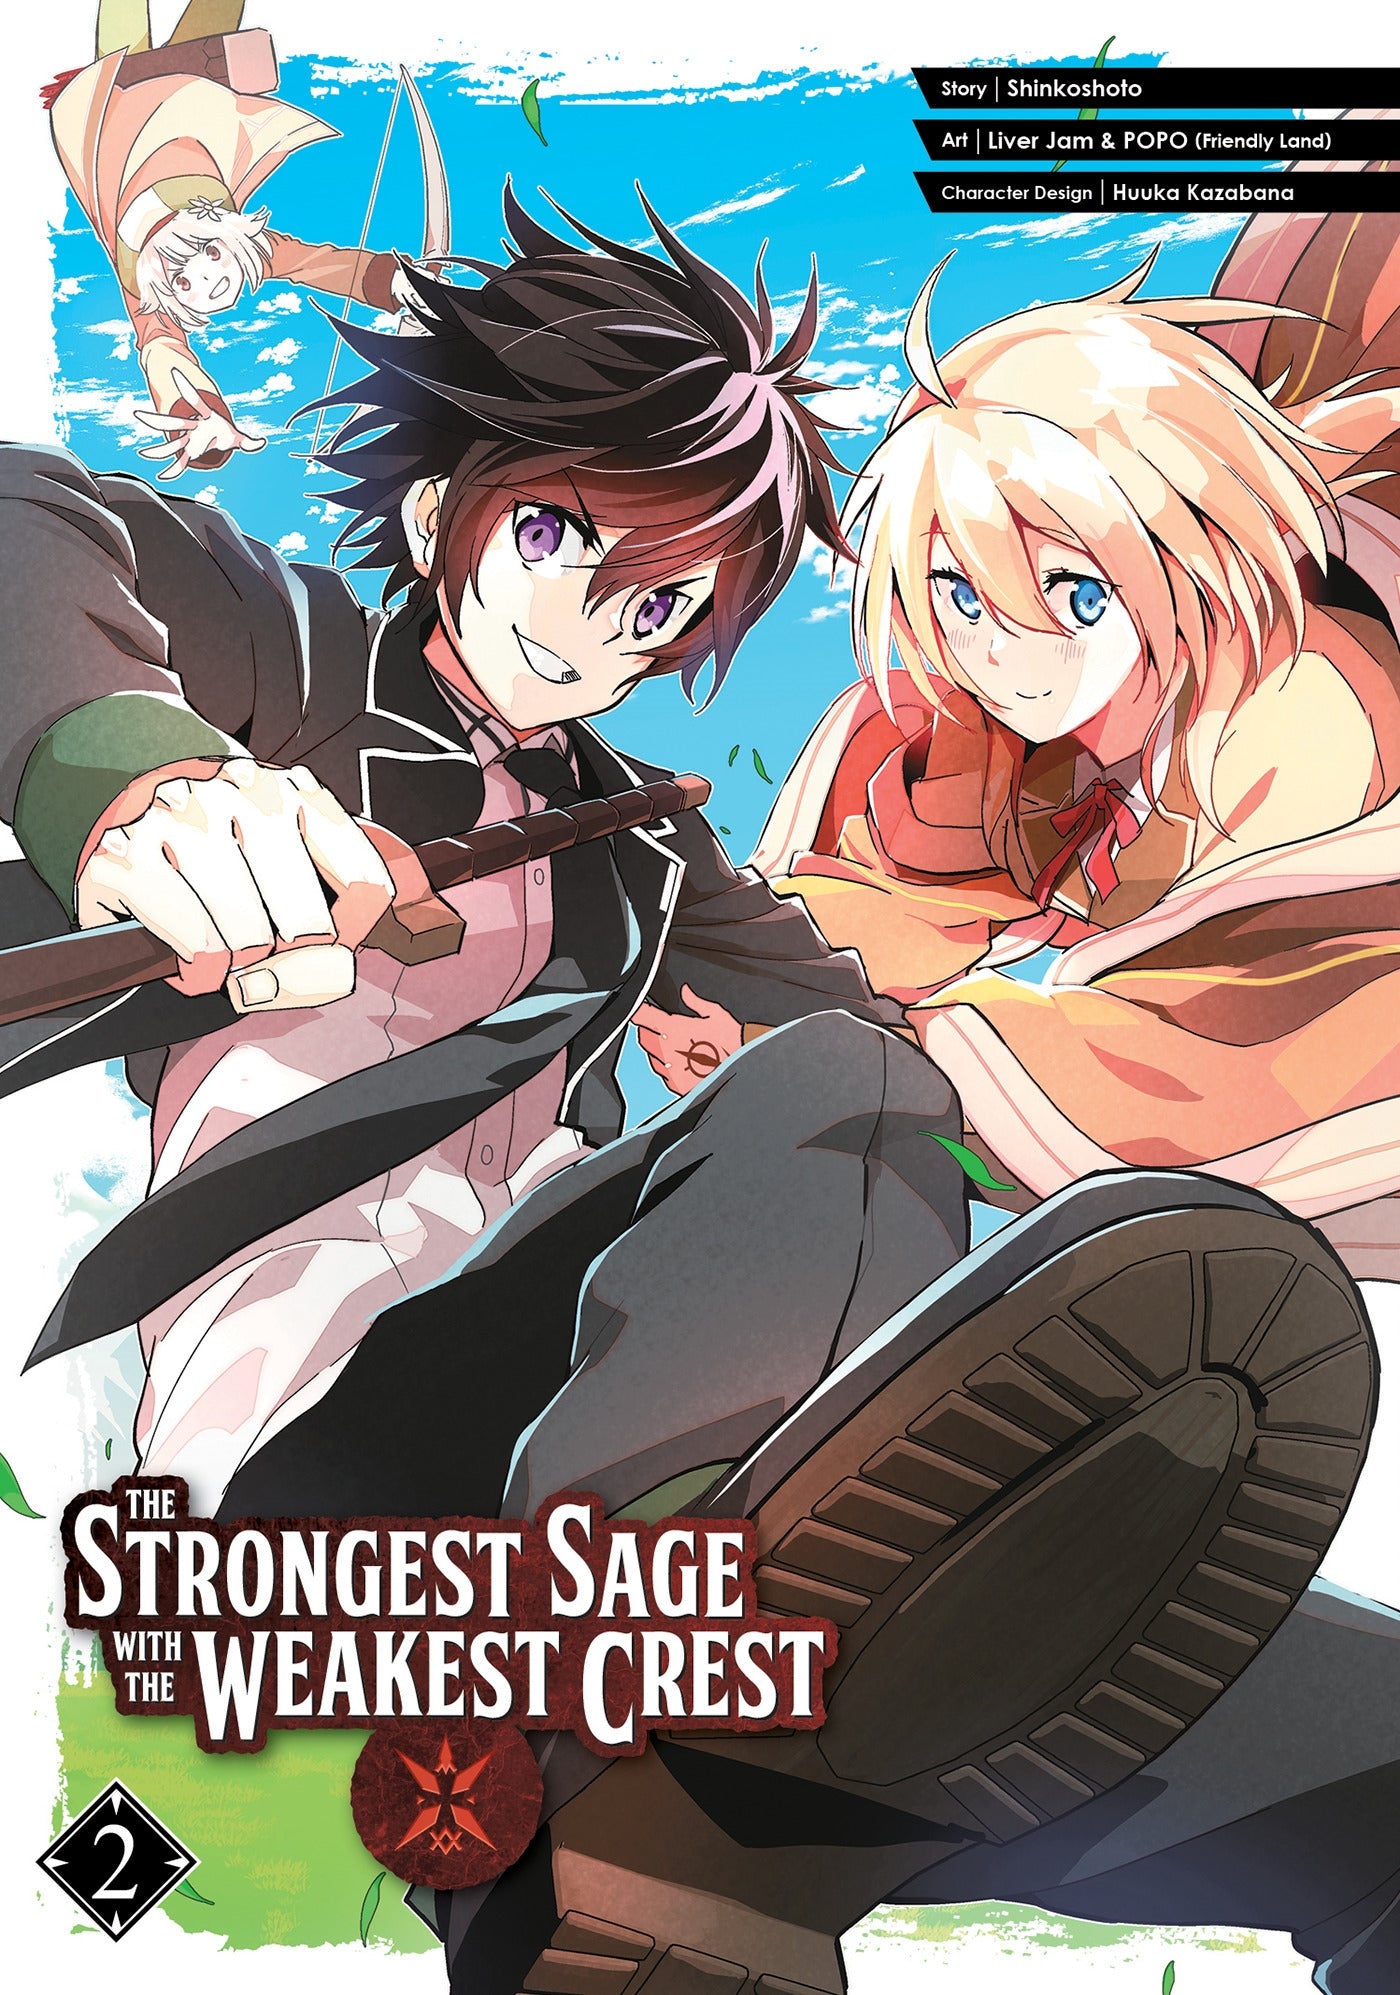 The Strongest Sage with the Weakest Crest 02 - Manga Warehouse